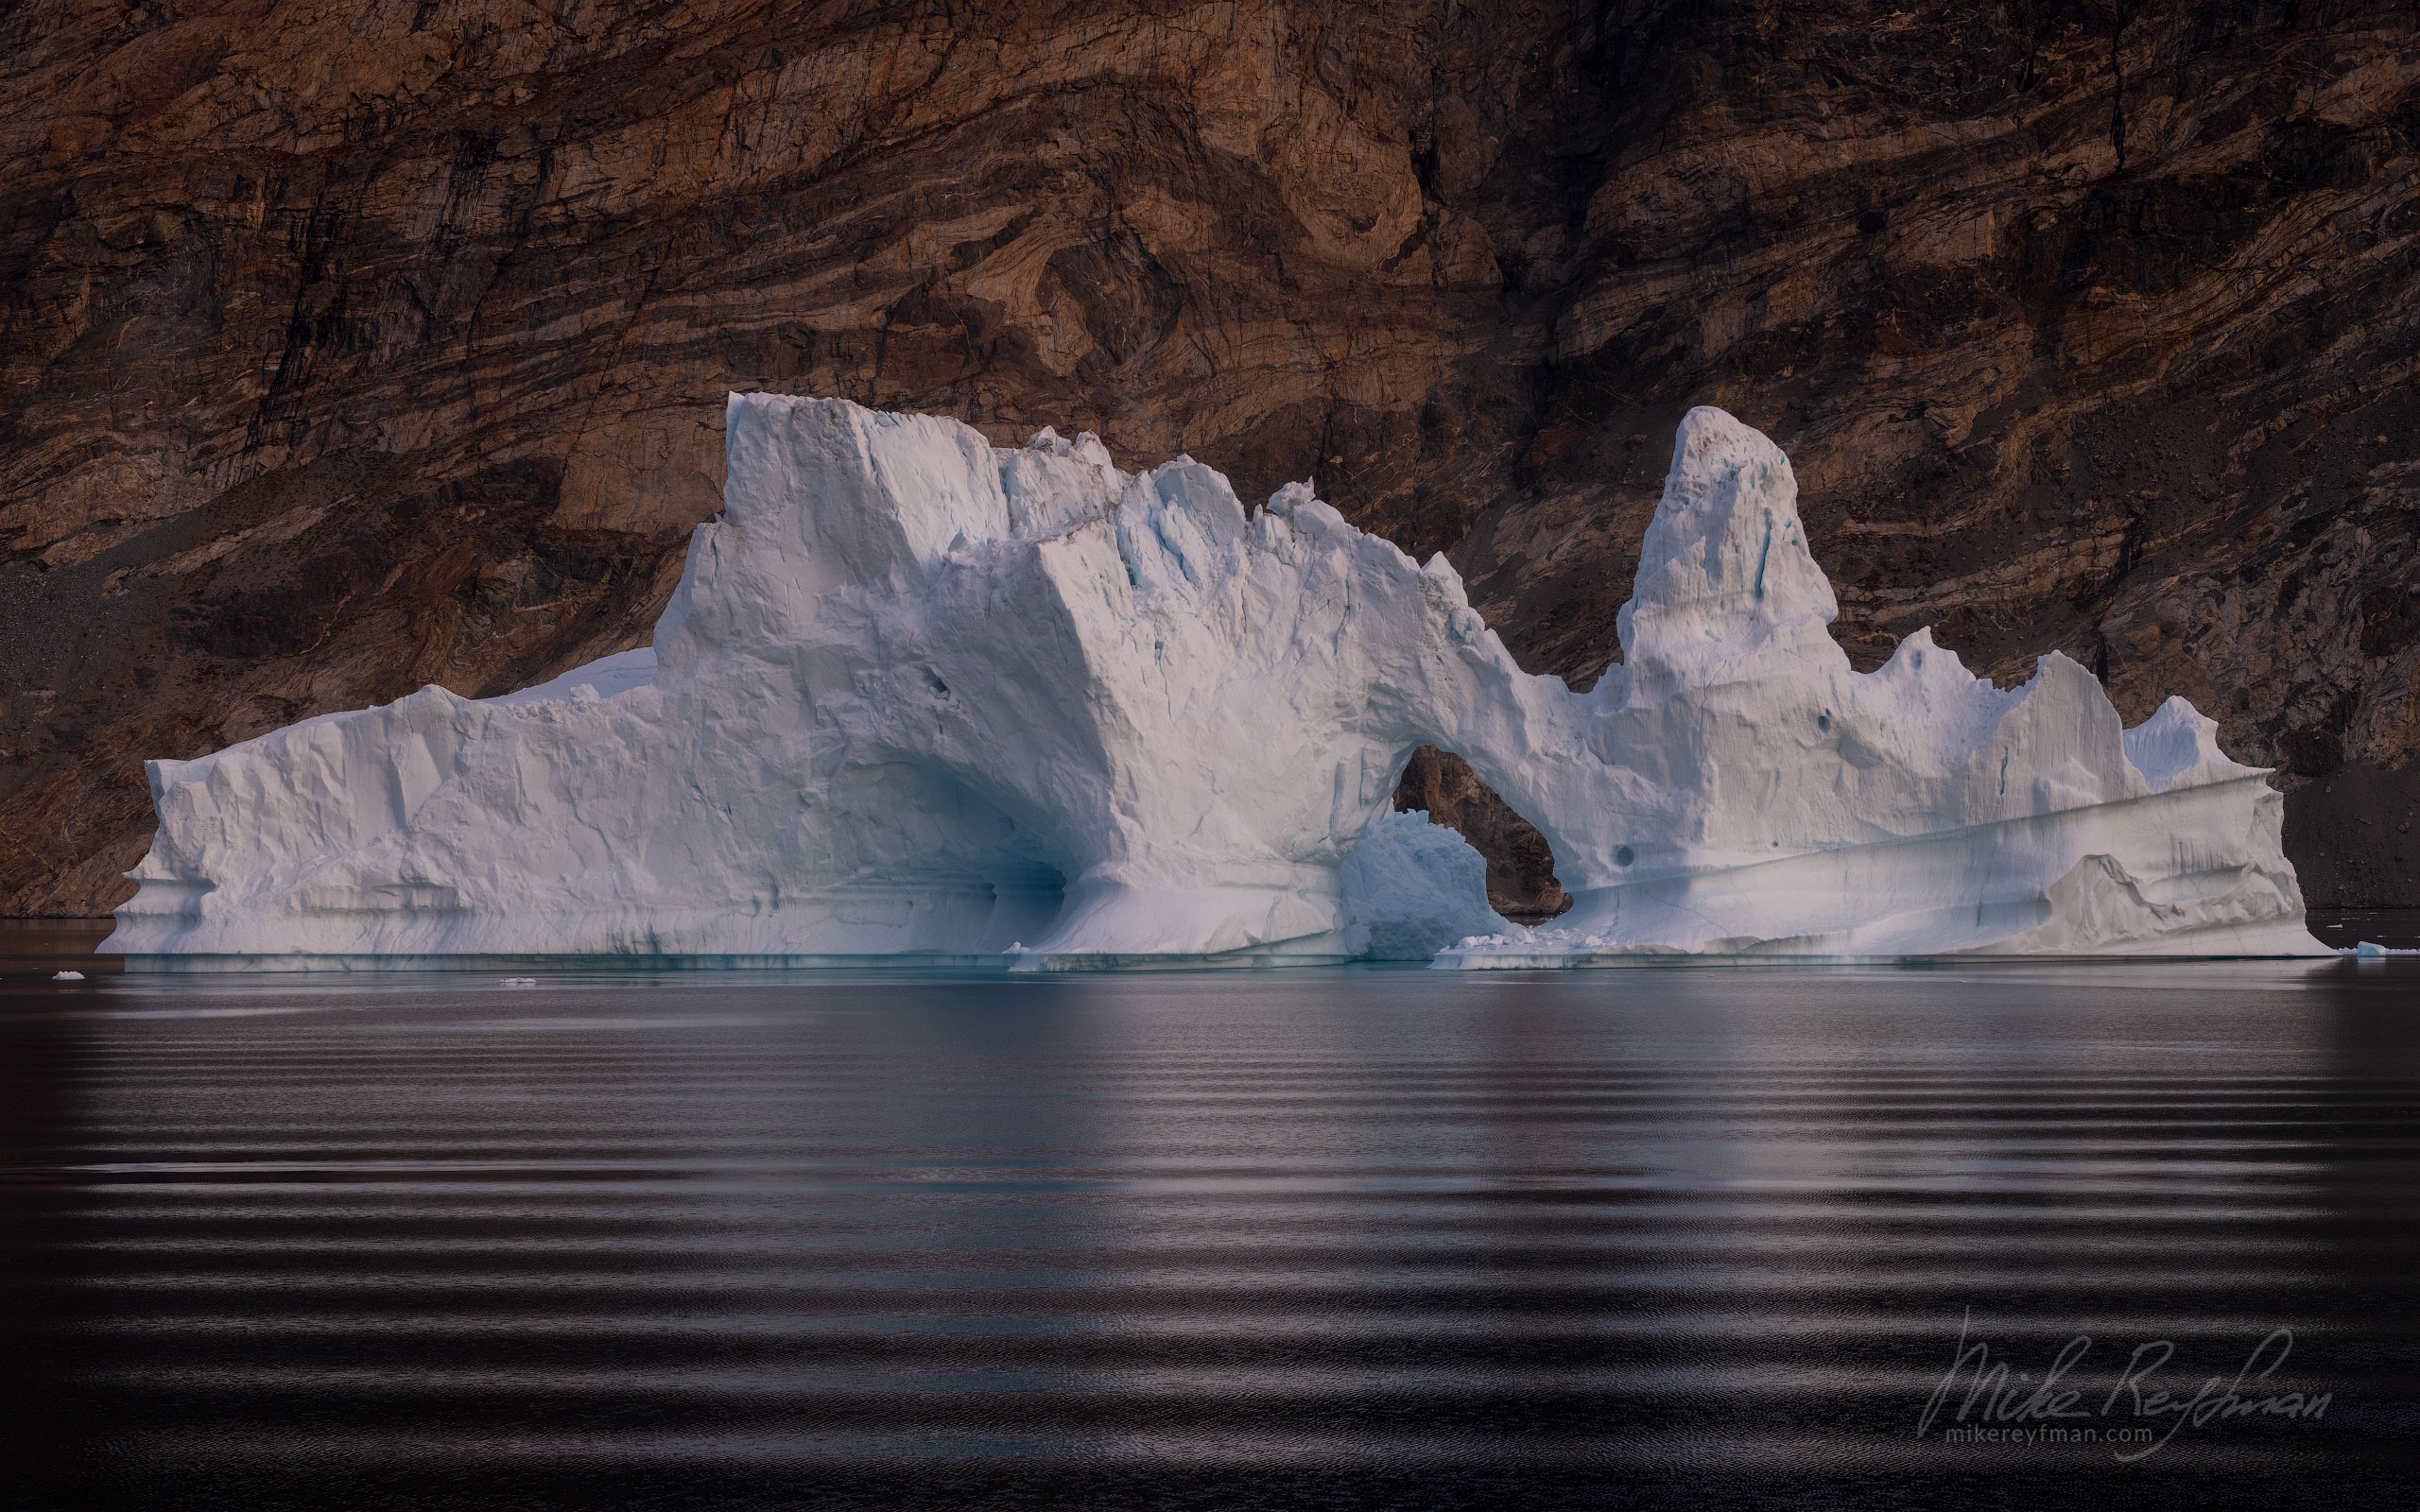 Iceberg in Scoresby Sund. Greenland. 029-GR-SC_50B6993 - The Scoresby Sund fjord system and the settlement of Ittoqqortoormiit. East Greenland. - Mike Reyfman Photography